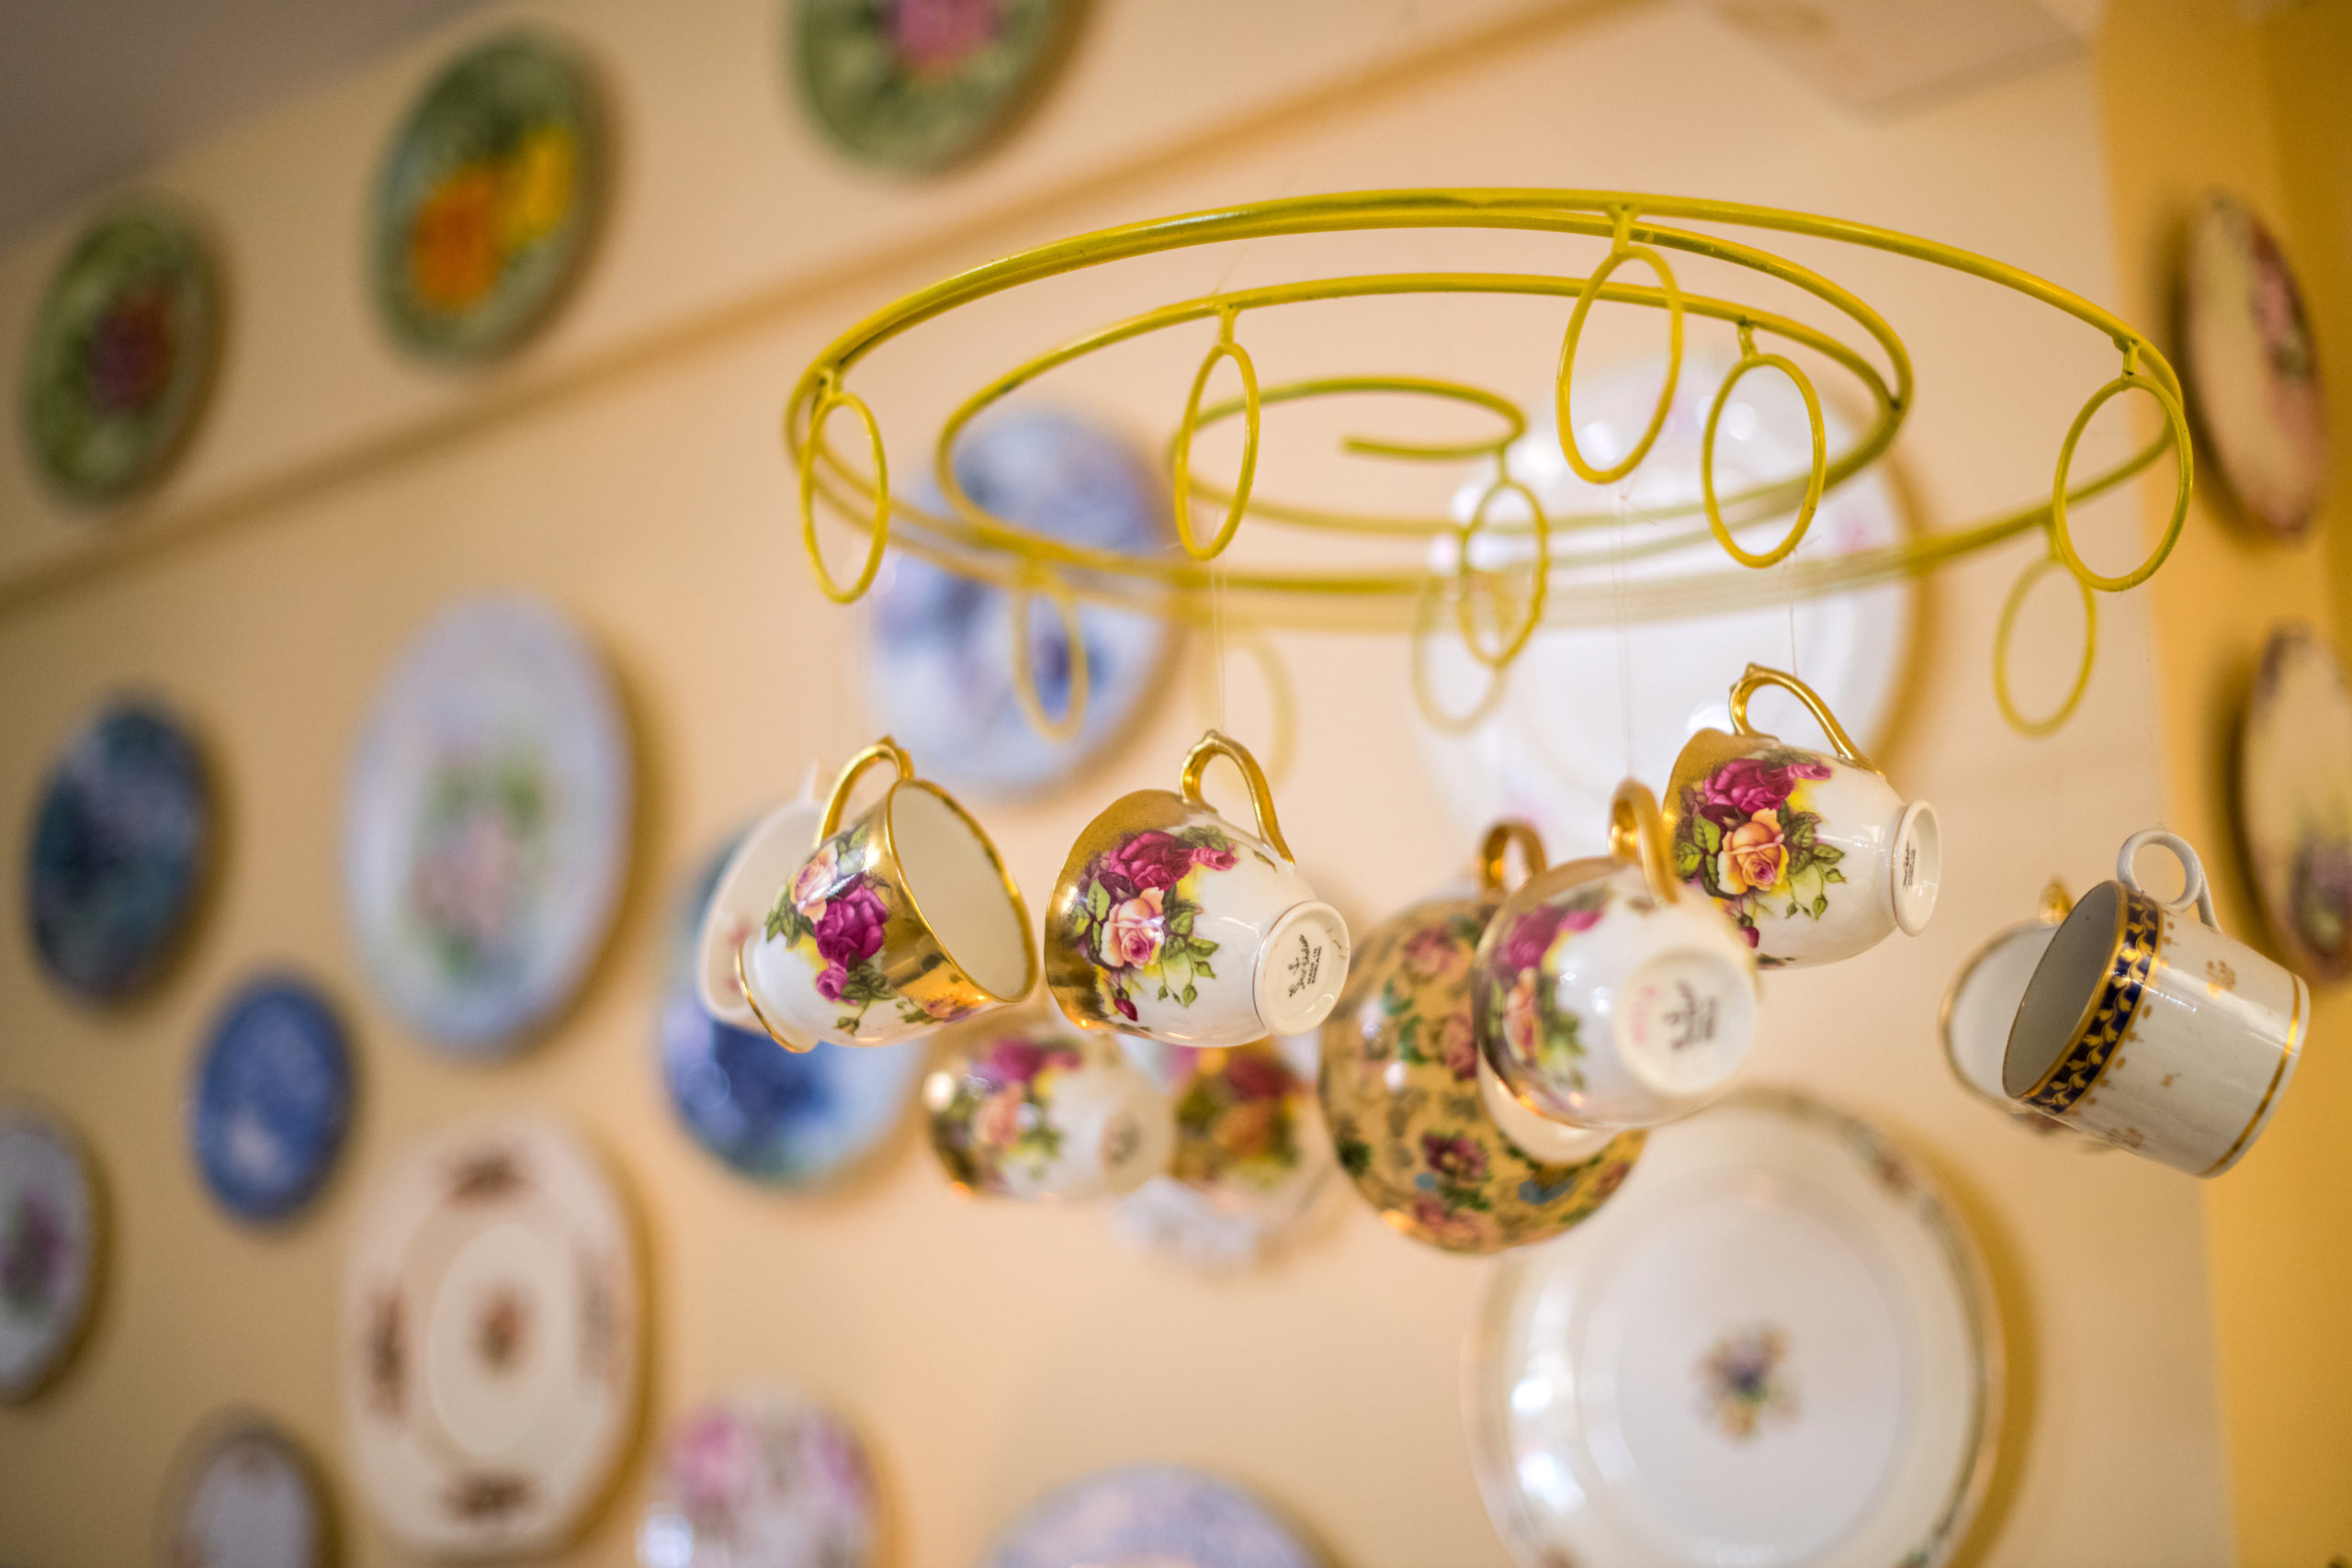 Hanging tea cups and plates